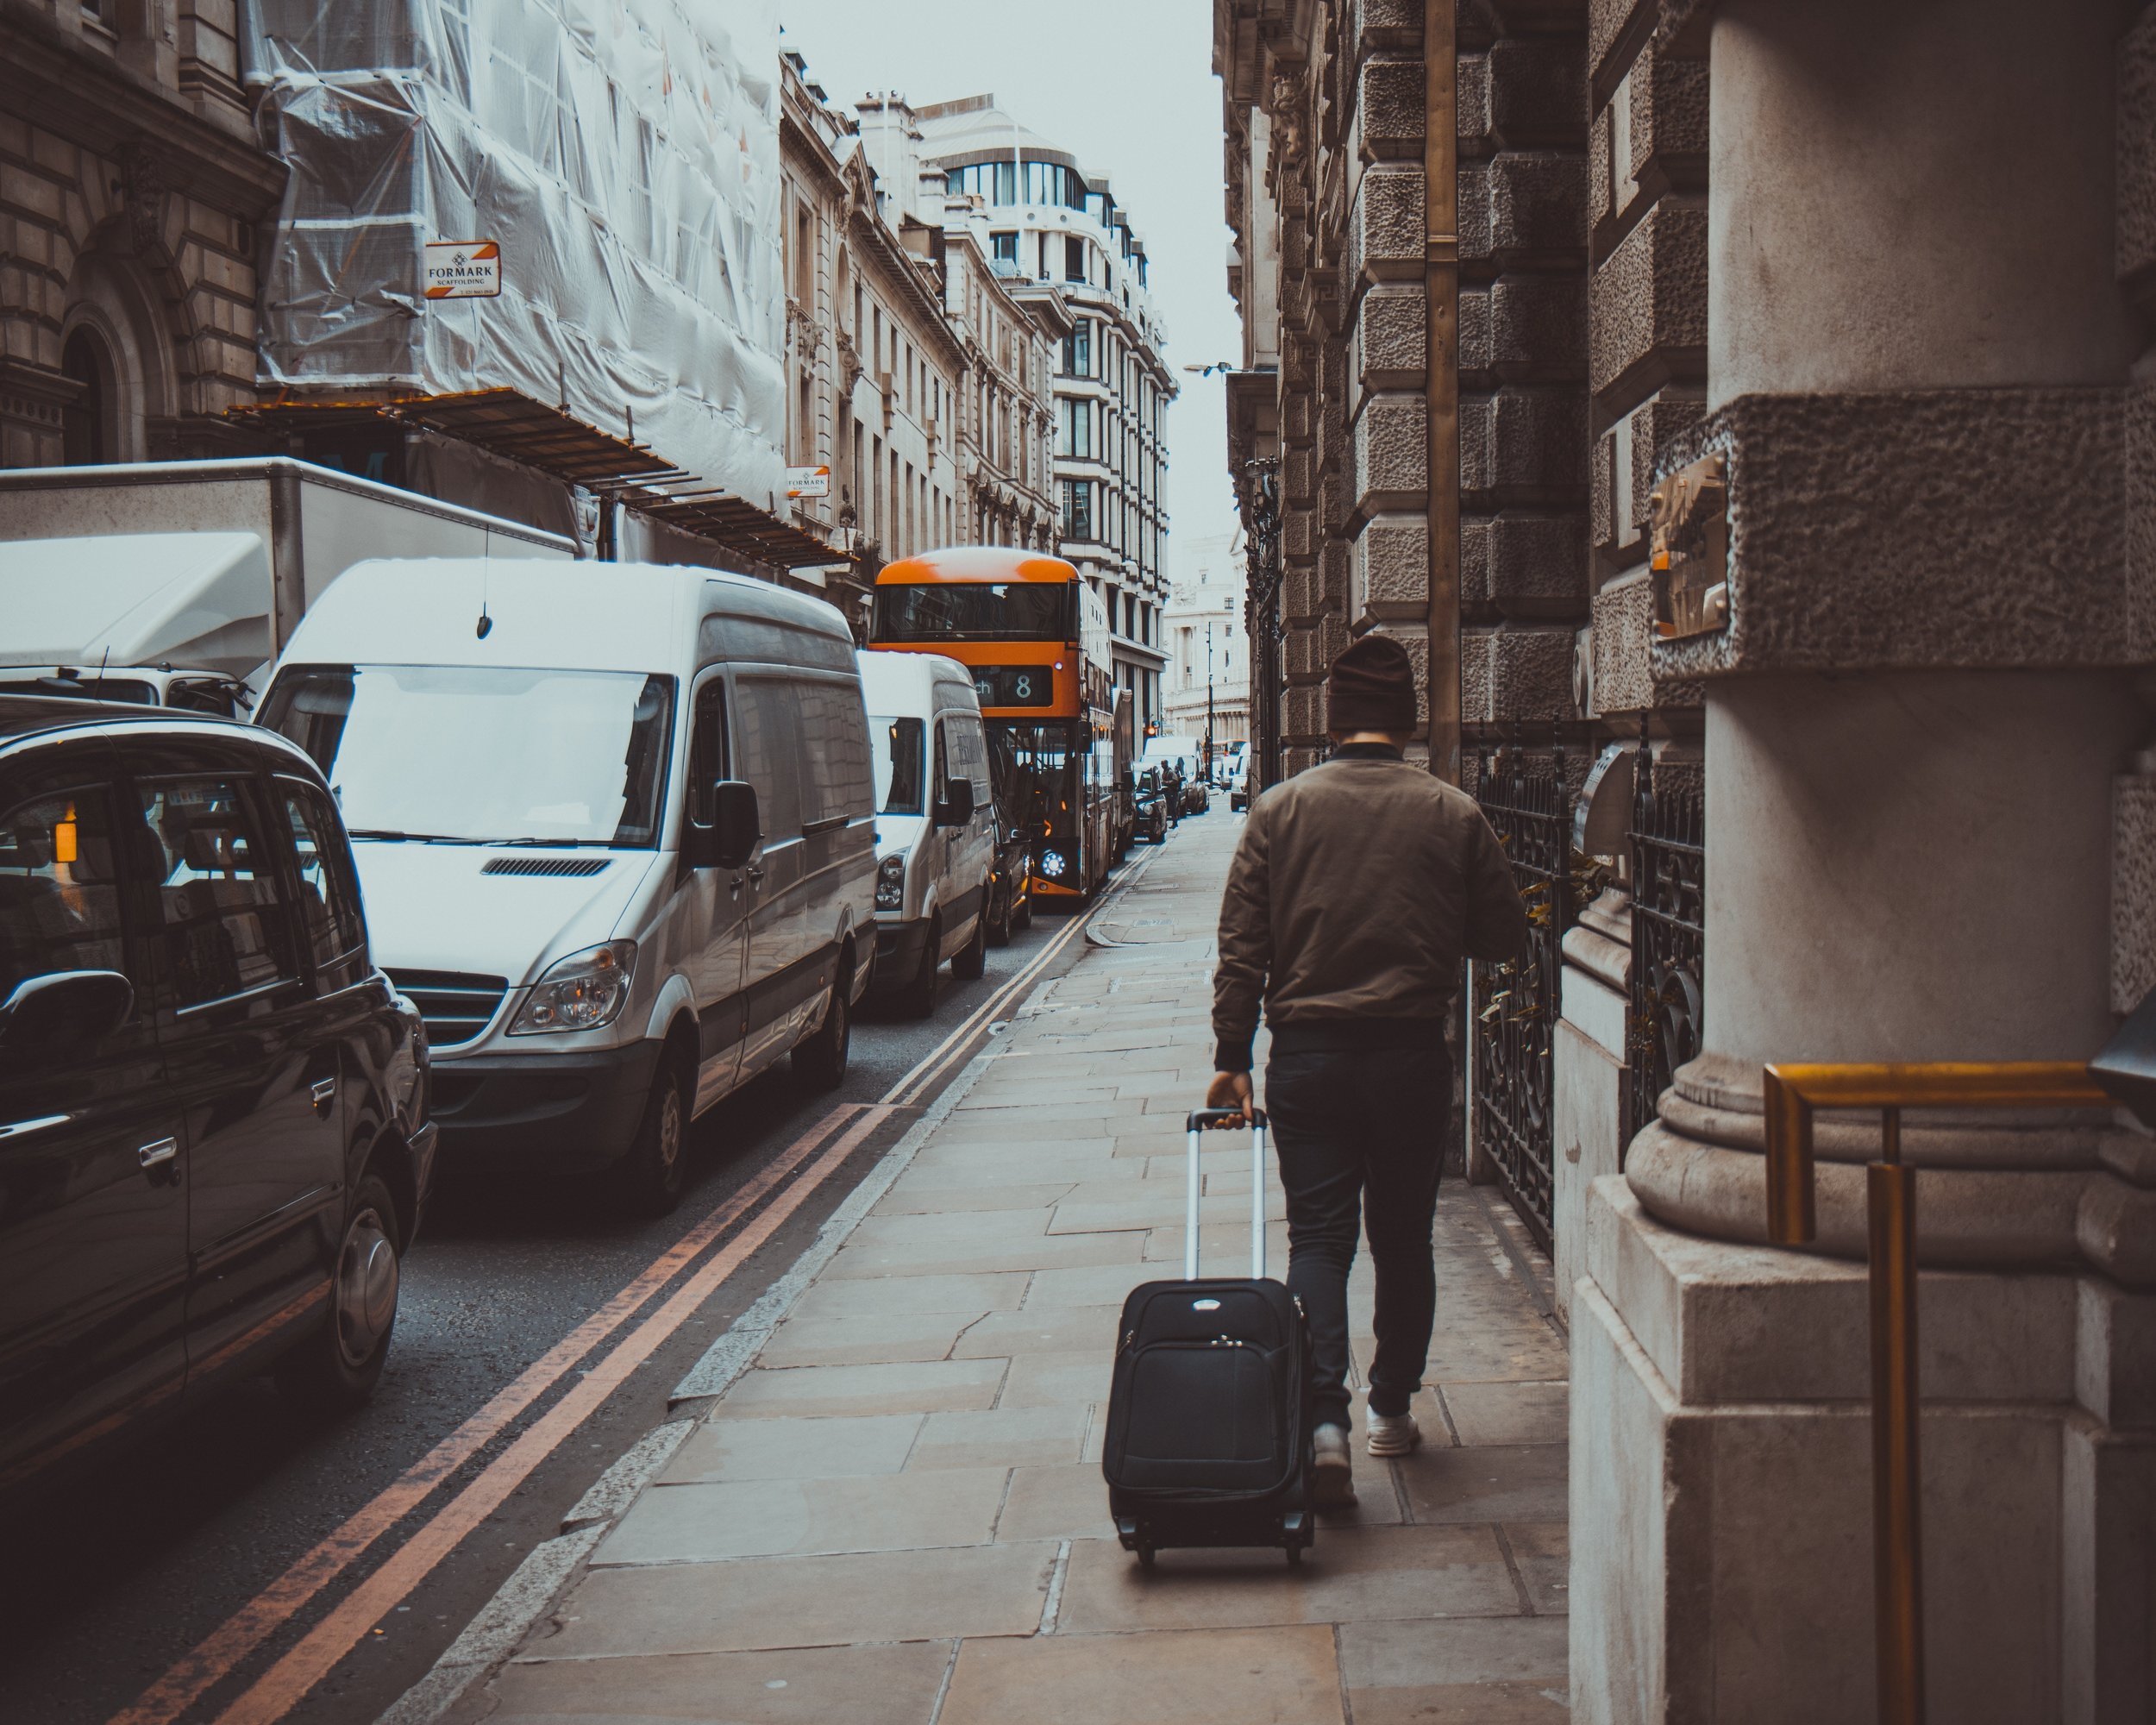 Man walking through the city with suitcase. Photo source Tomáš Gal on Pexels.